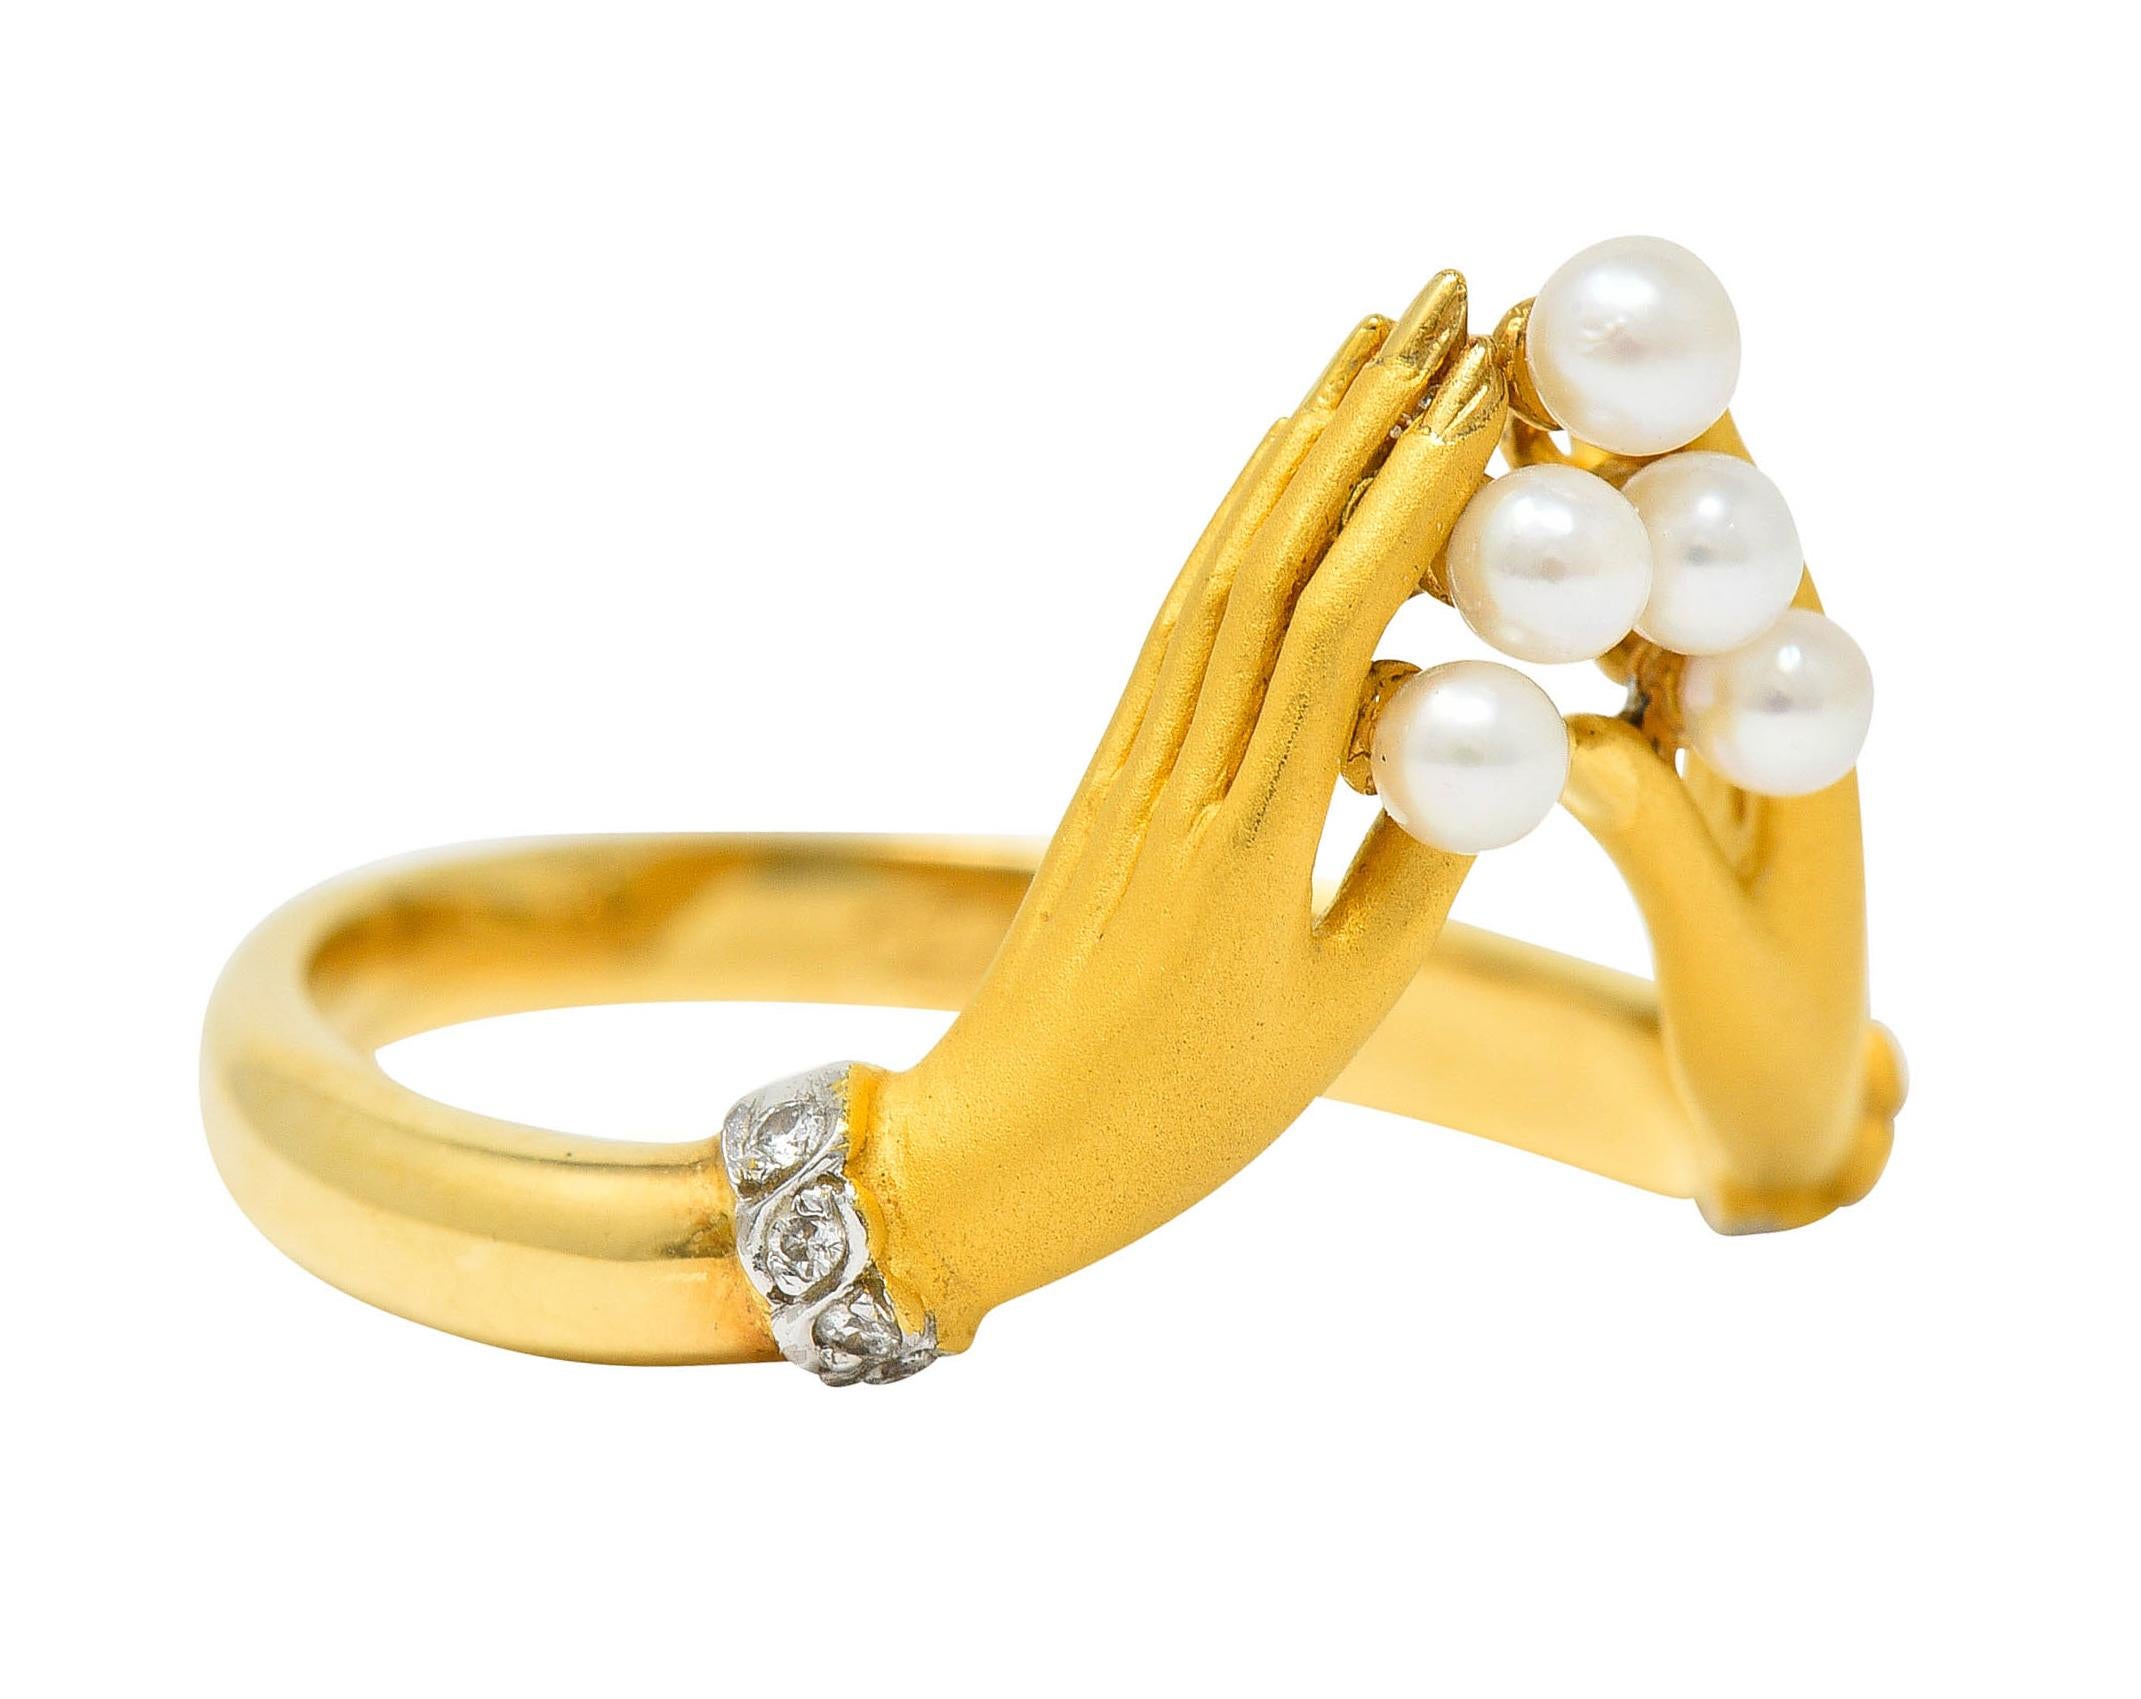 Chevron style ring is comprised of two highly rendered and matte gold hands

Holding 2.5 mm round pearls - very well matched in white body color and very good in luster

White gold cuffs are accented by round brilliant cut diamonds weighing in total